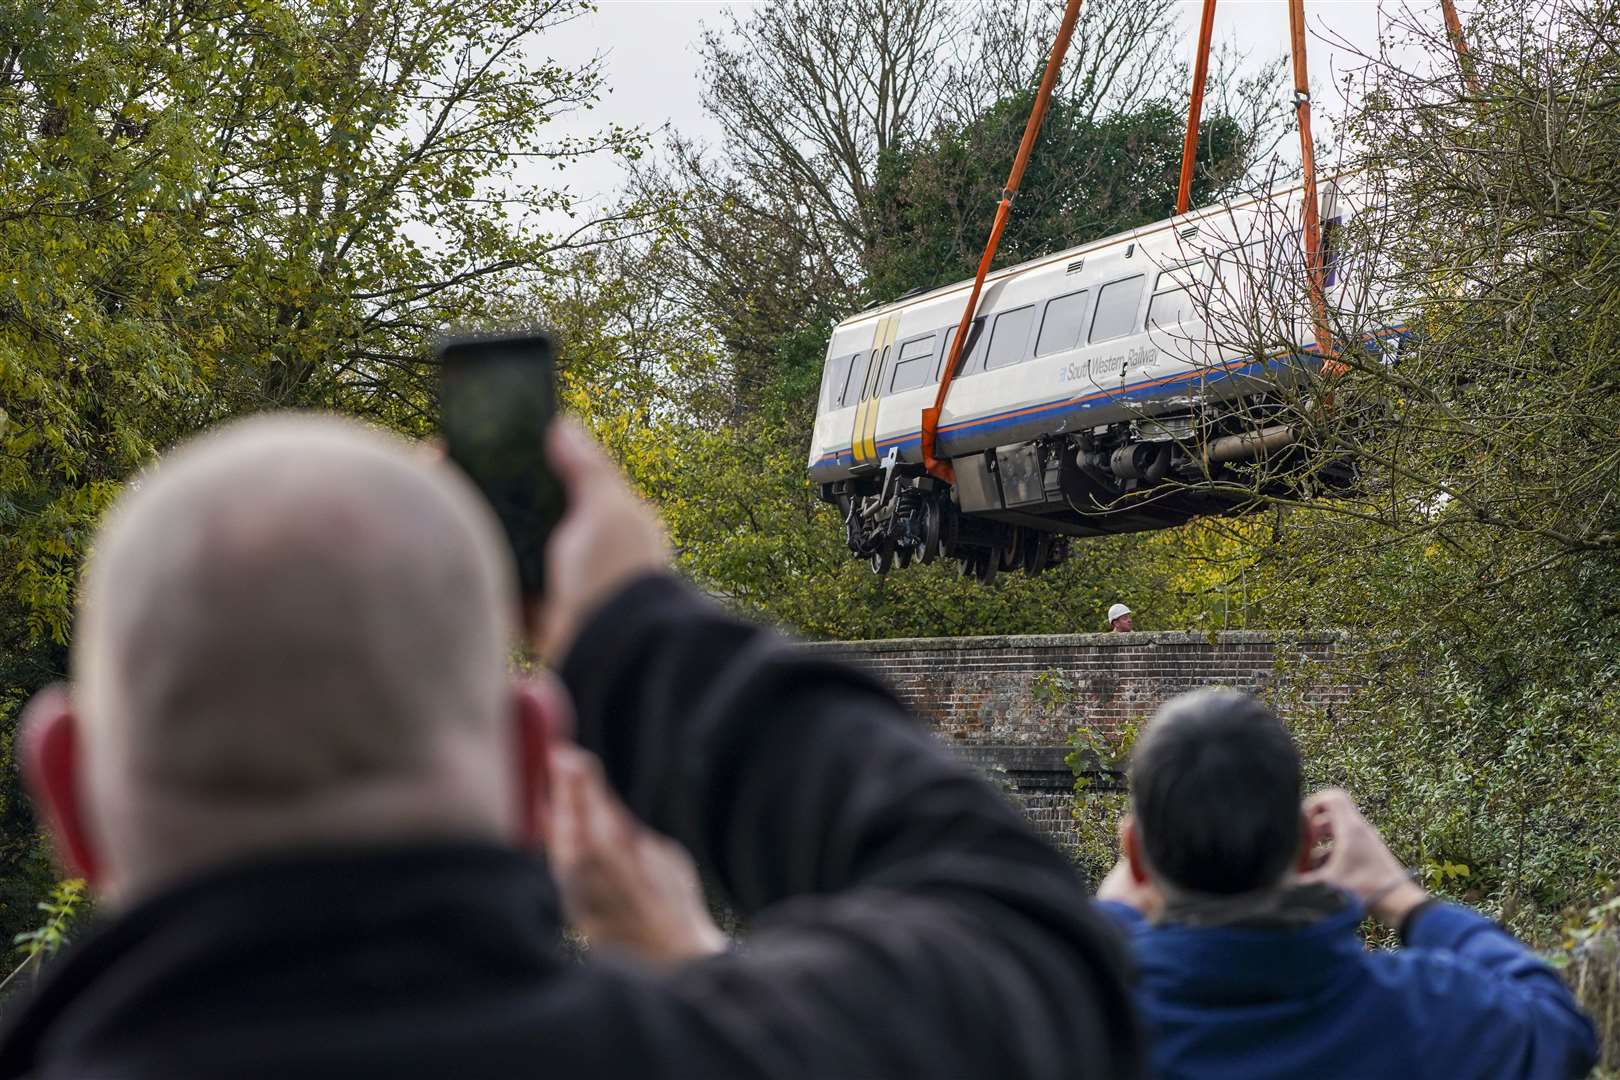 A major operation was needed to reopen the line, including removing the train carriages (Steve Parsons/PA)